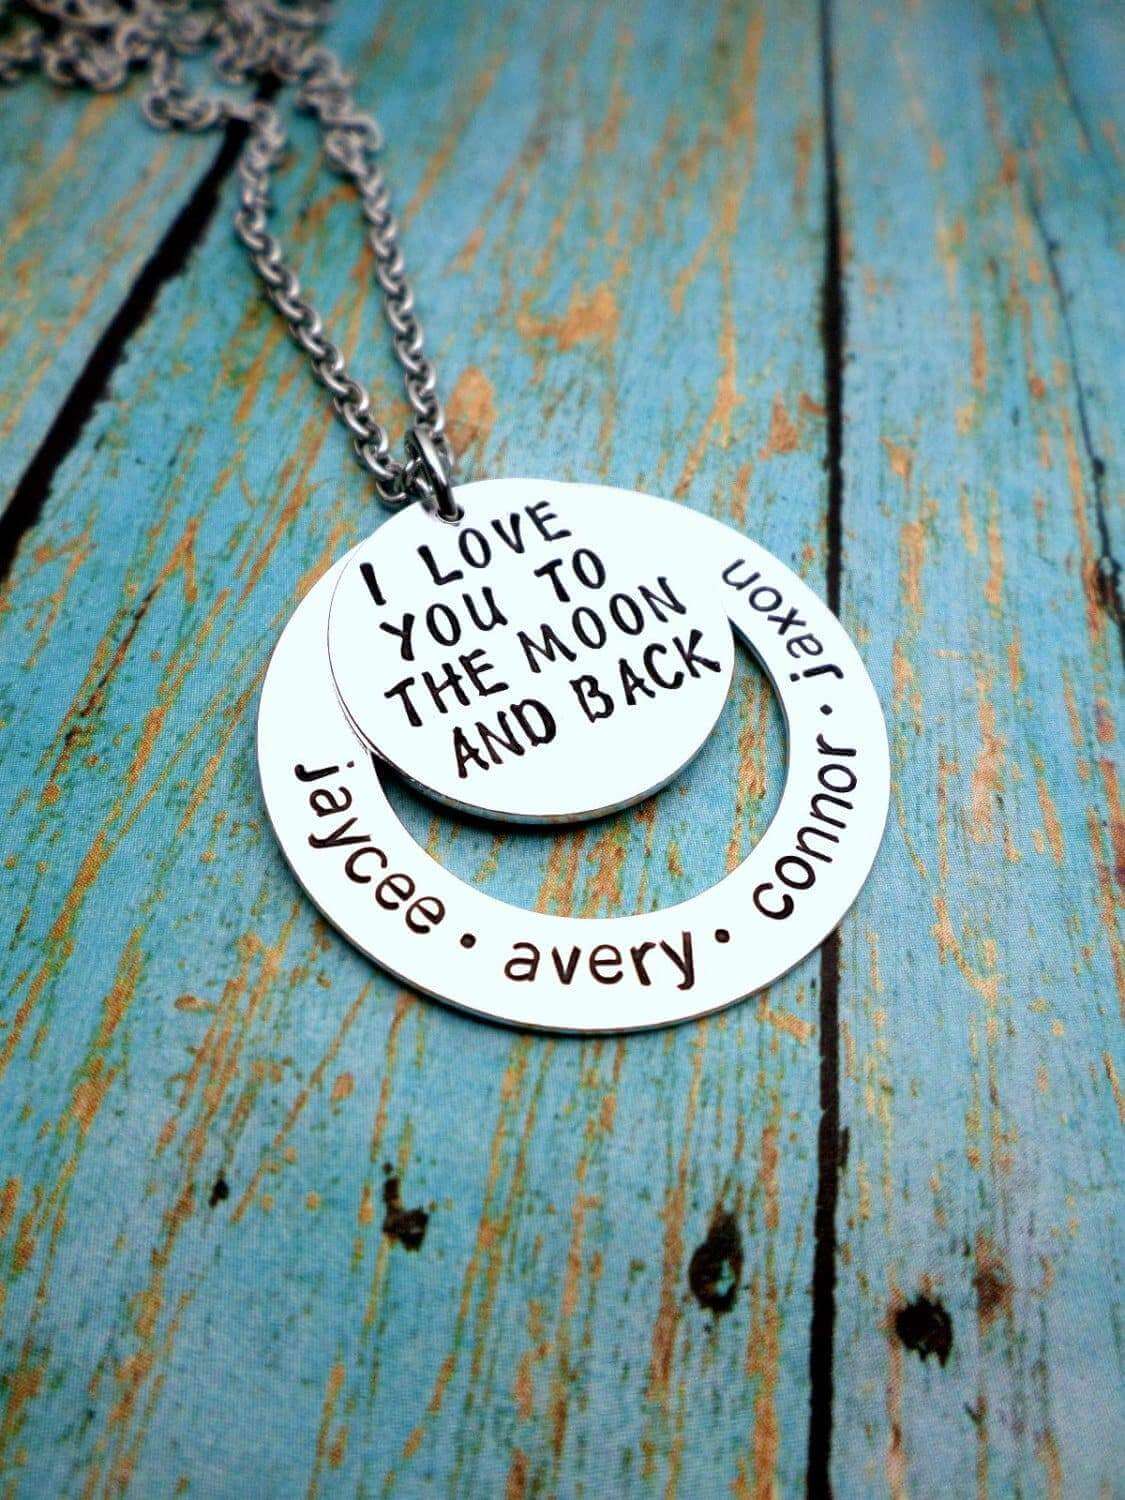 To The Moon and Back, Mother's Necklace, Childrens Names, Mothers Jewelry, Mother's Love, Mothers, Necklaces, HandmadeLoveStories, HandmadeLoveStories , [Handmade_Love_Stories], [Hand_Stamped_Jewelry], [Etsy_Stamped_Jewelry], [Etsy_Jewelry]